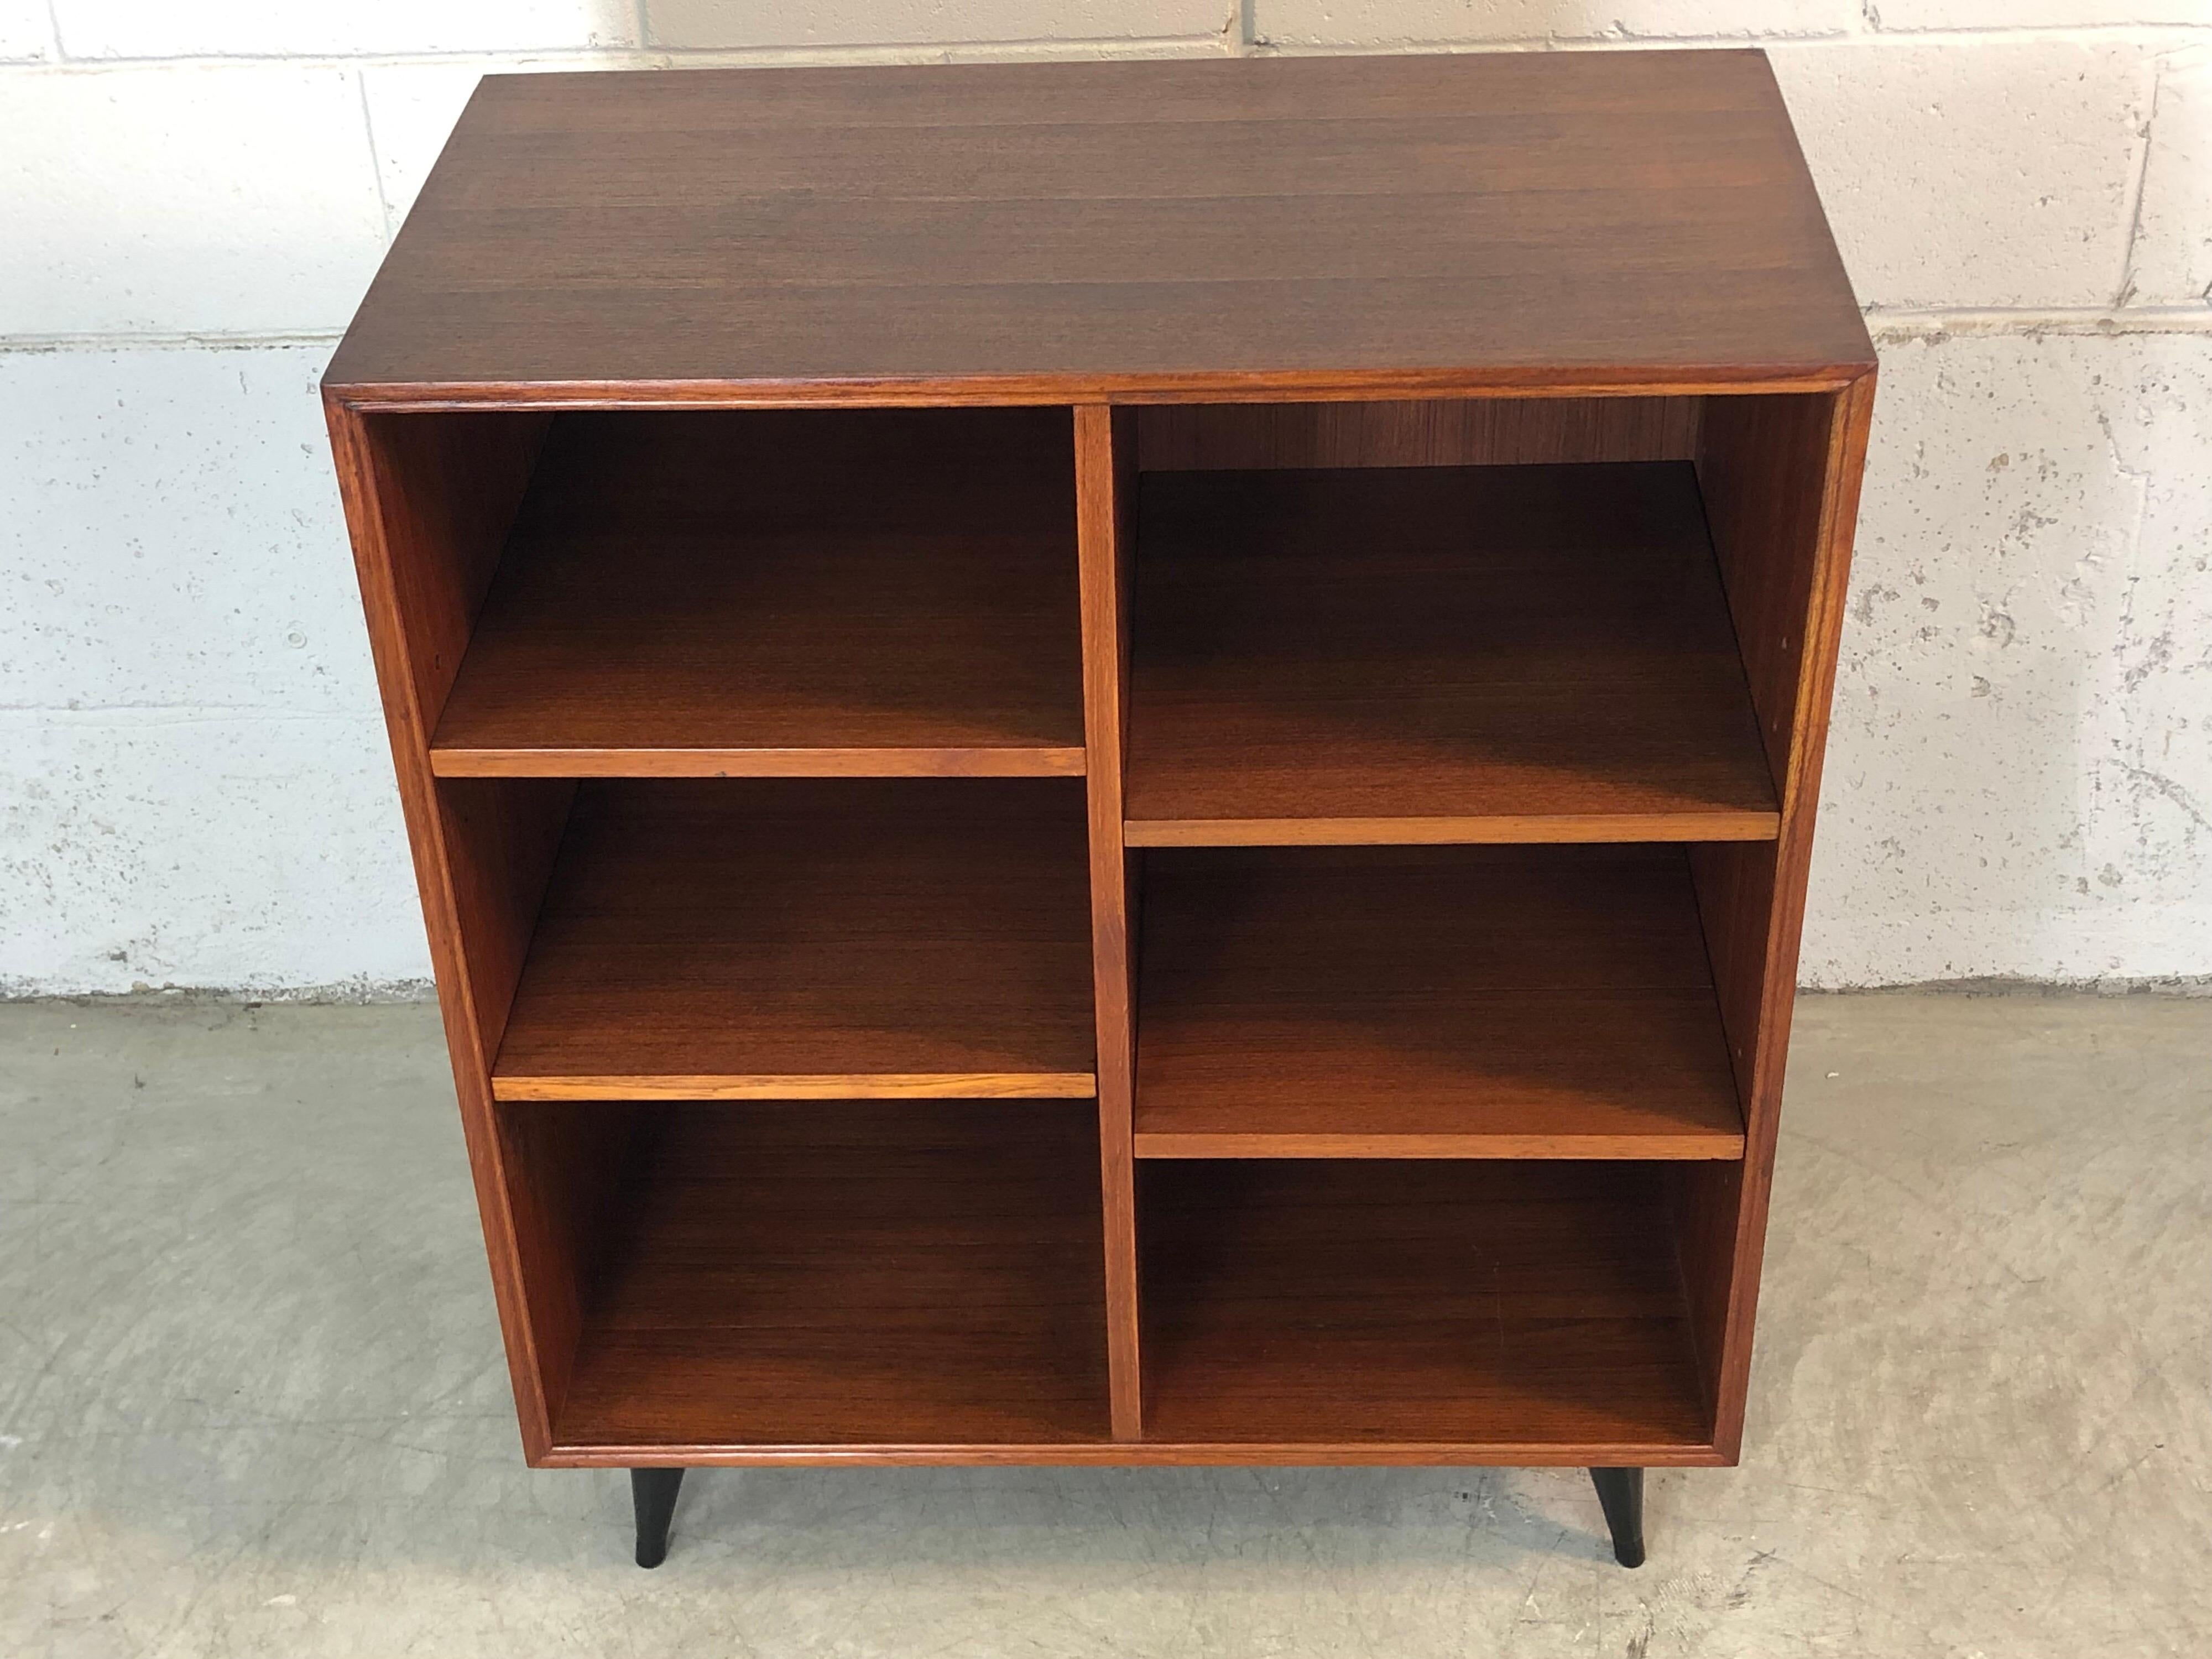 Vintage 1960s teak wood adjustable shelf bookcase. Great compact size and the shelves can be configured any way you want. Legs are painted black. The bookcase has been restored and refinished and is in excellent condition.